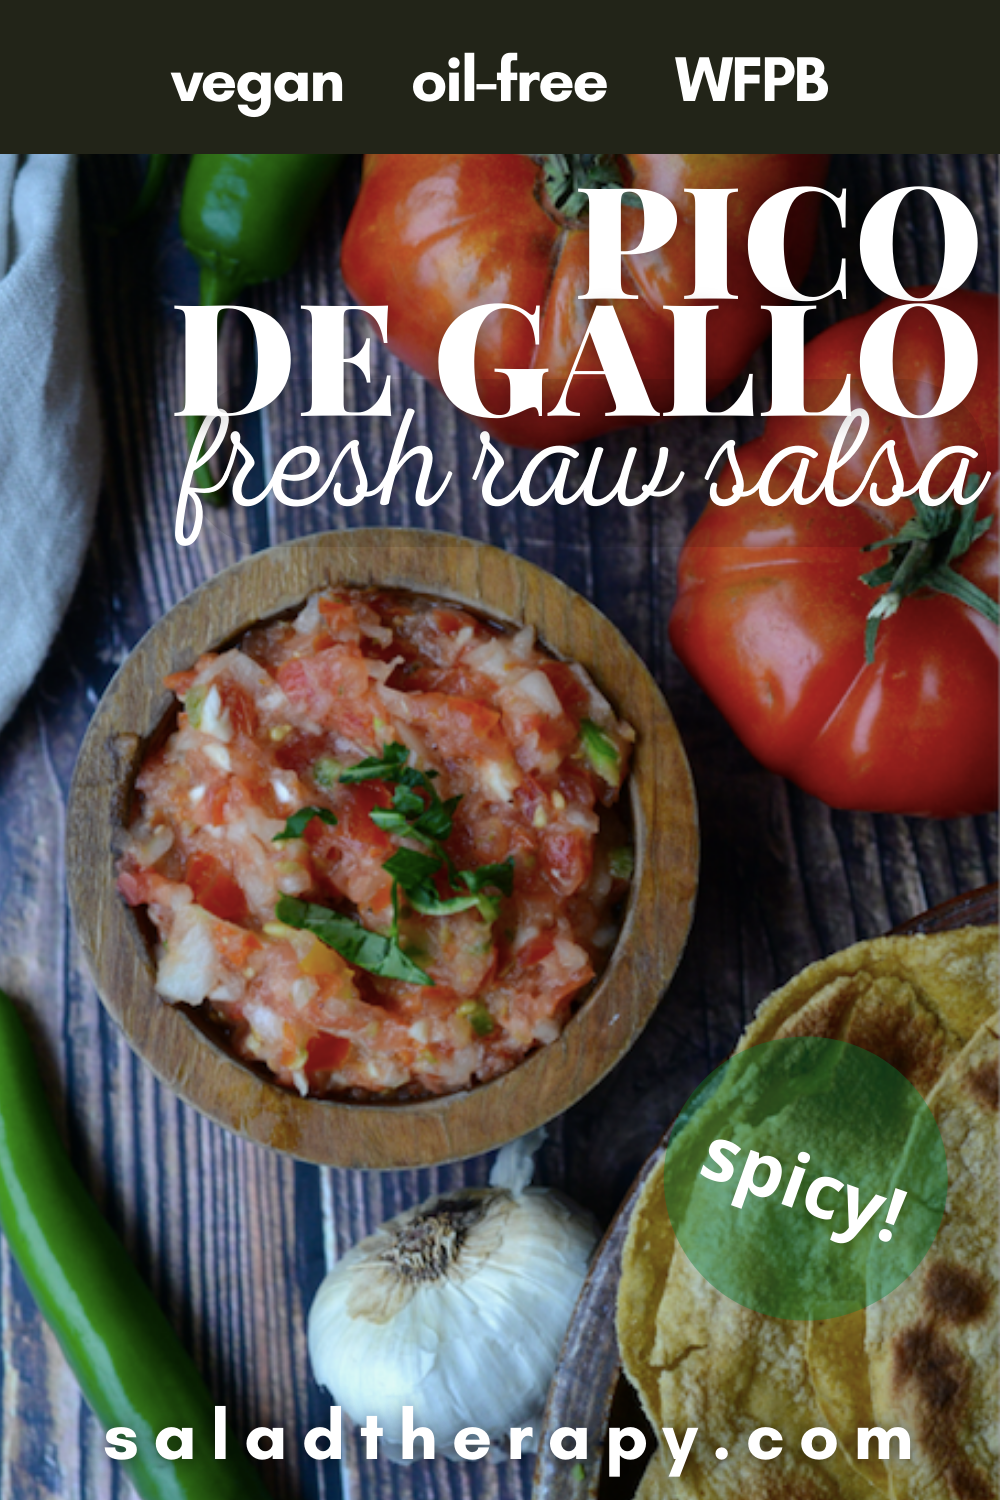 pico de gallo [fresh raw salsa] pinterest image, areal shot with ingredients